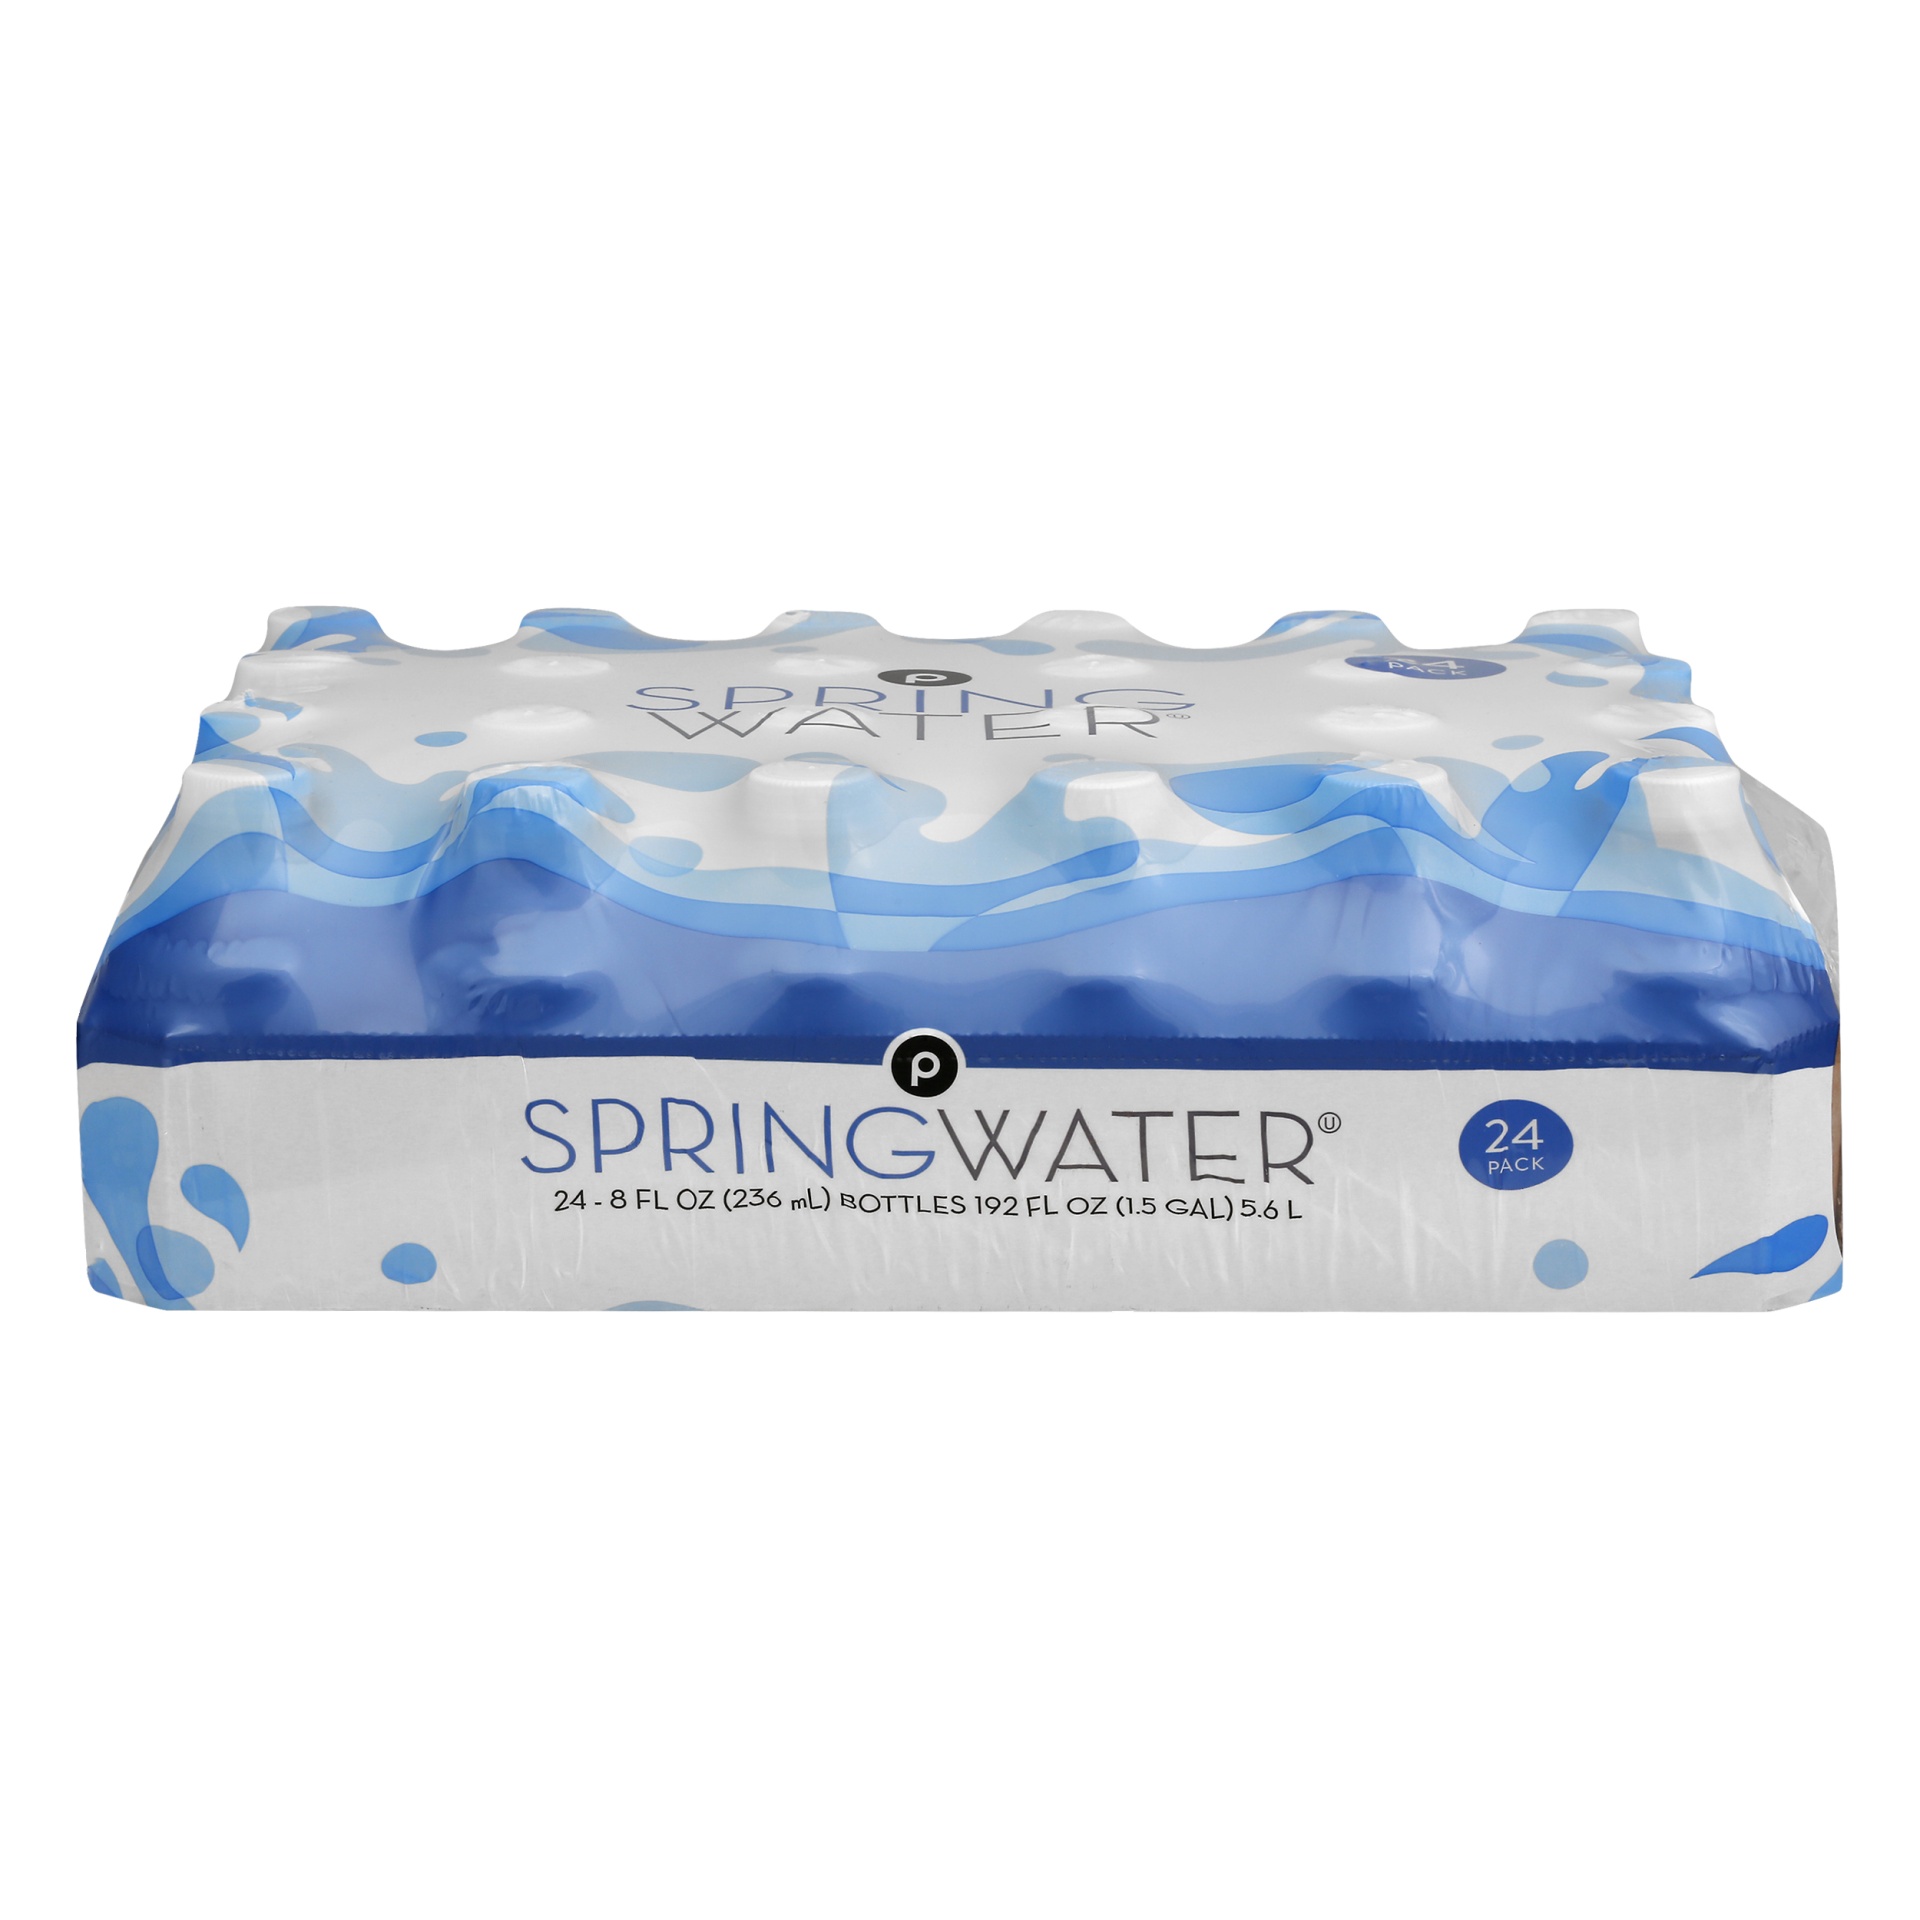 Publix Spring Water, 6 Pack